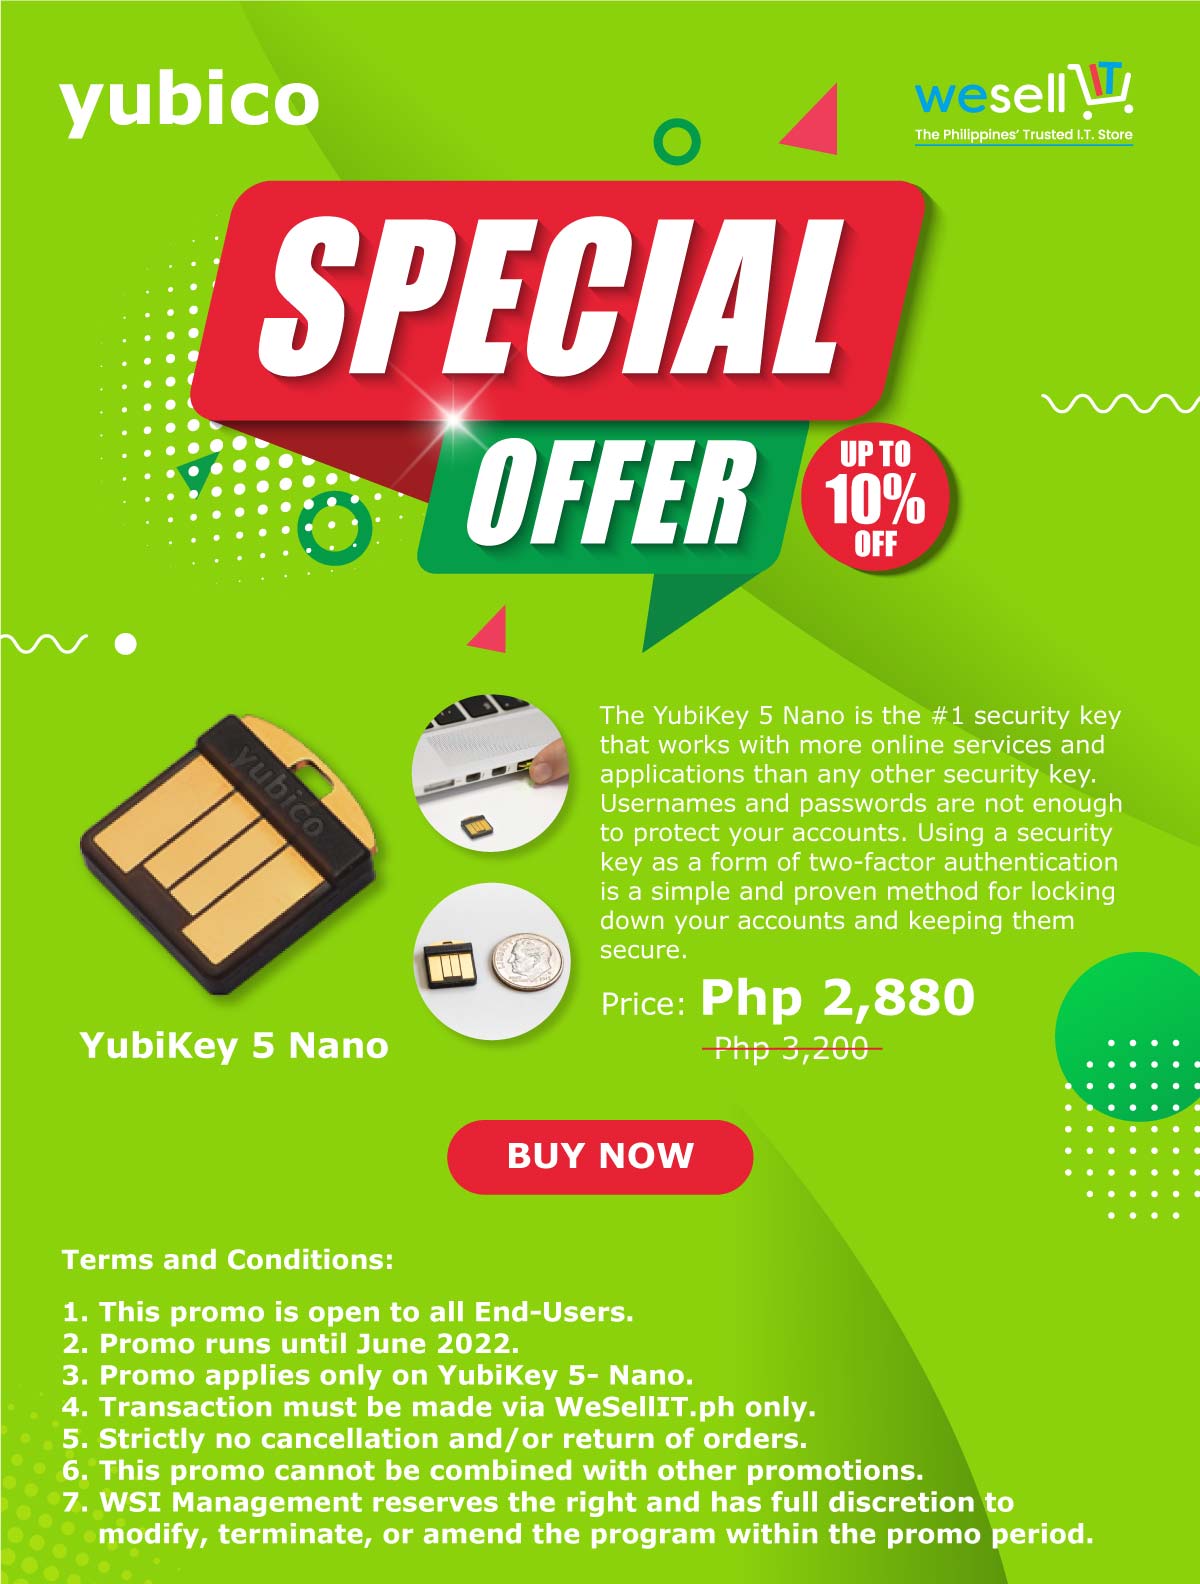 Yubico WesellIT Special Offer